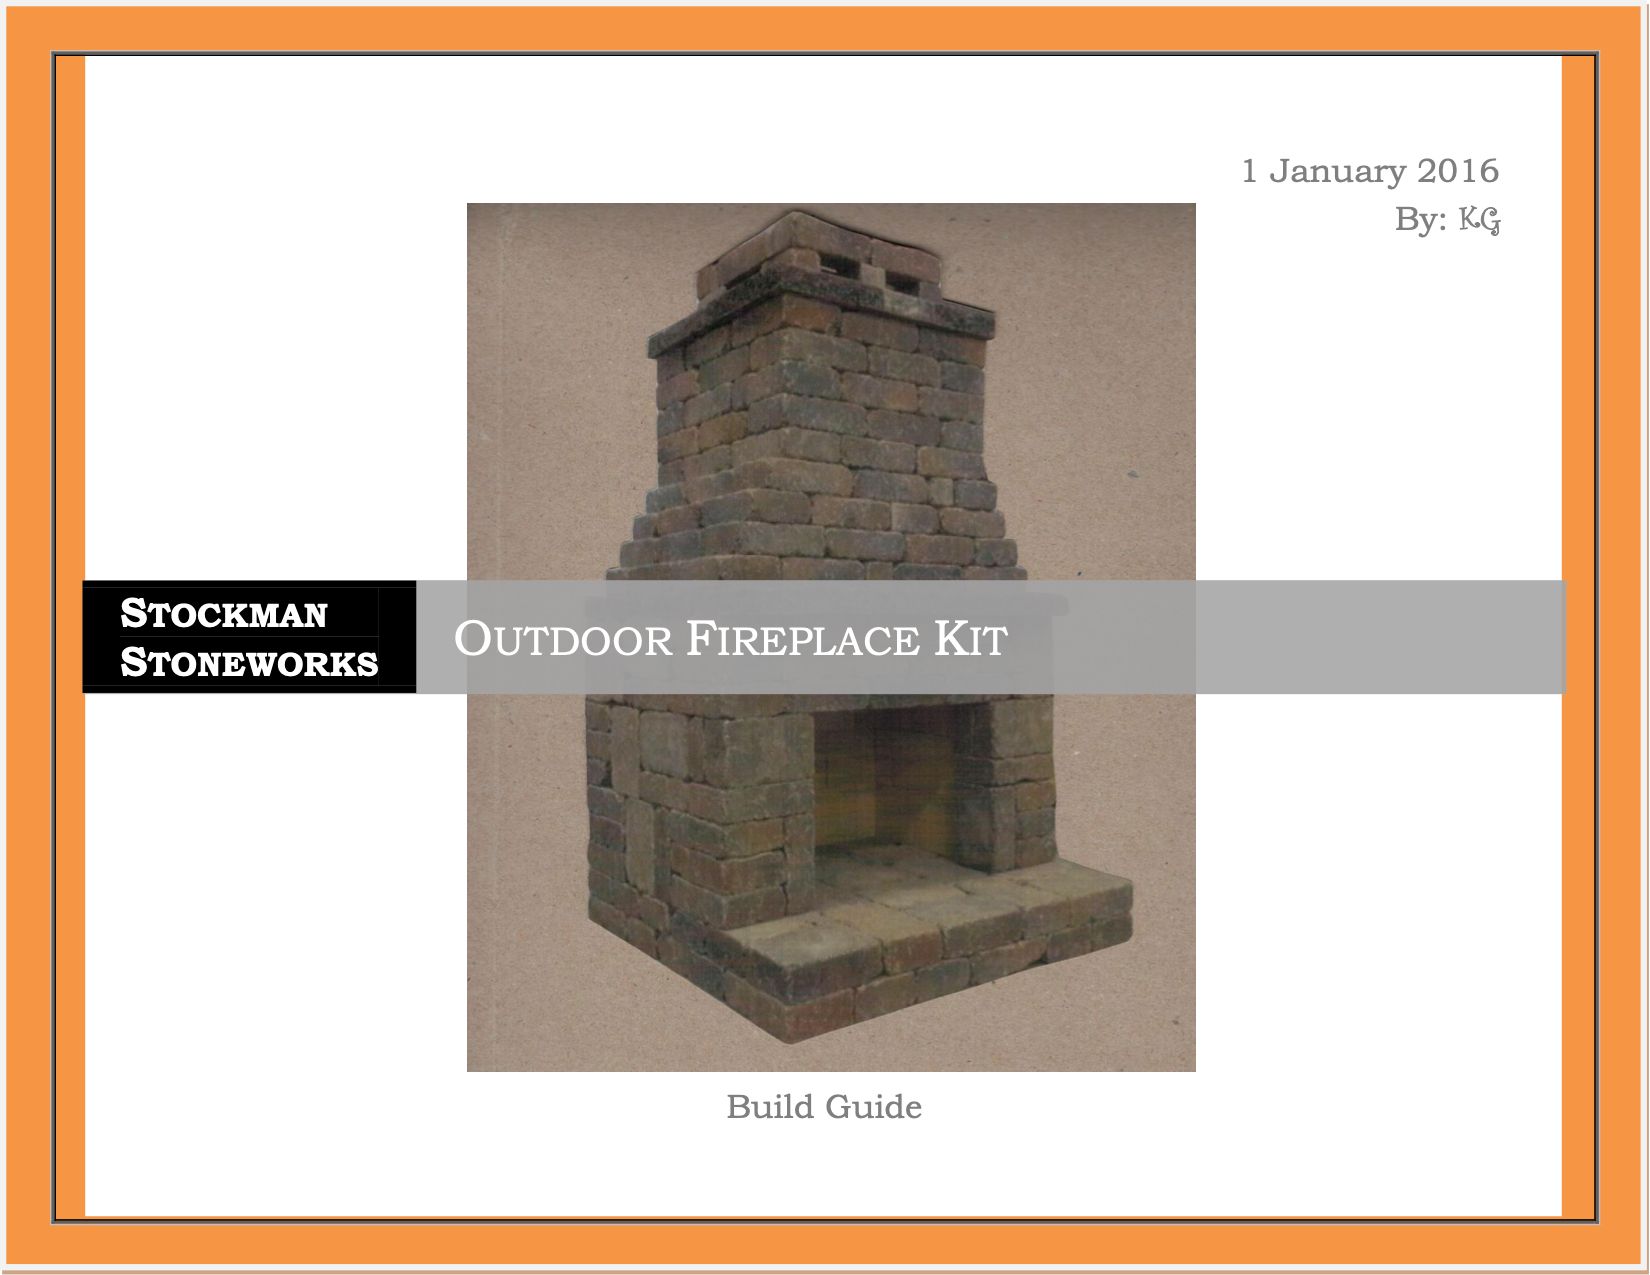 Durable and Beautiful Fire Places- Stockman Stoneworks Has You Covered.